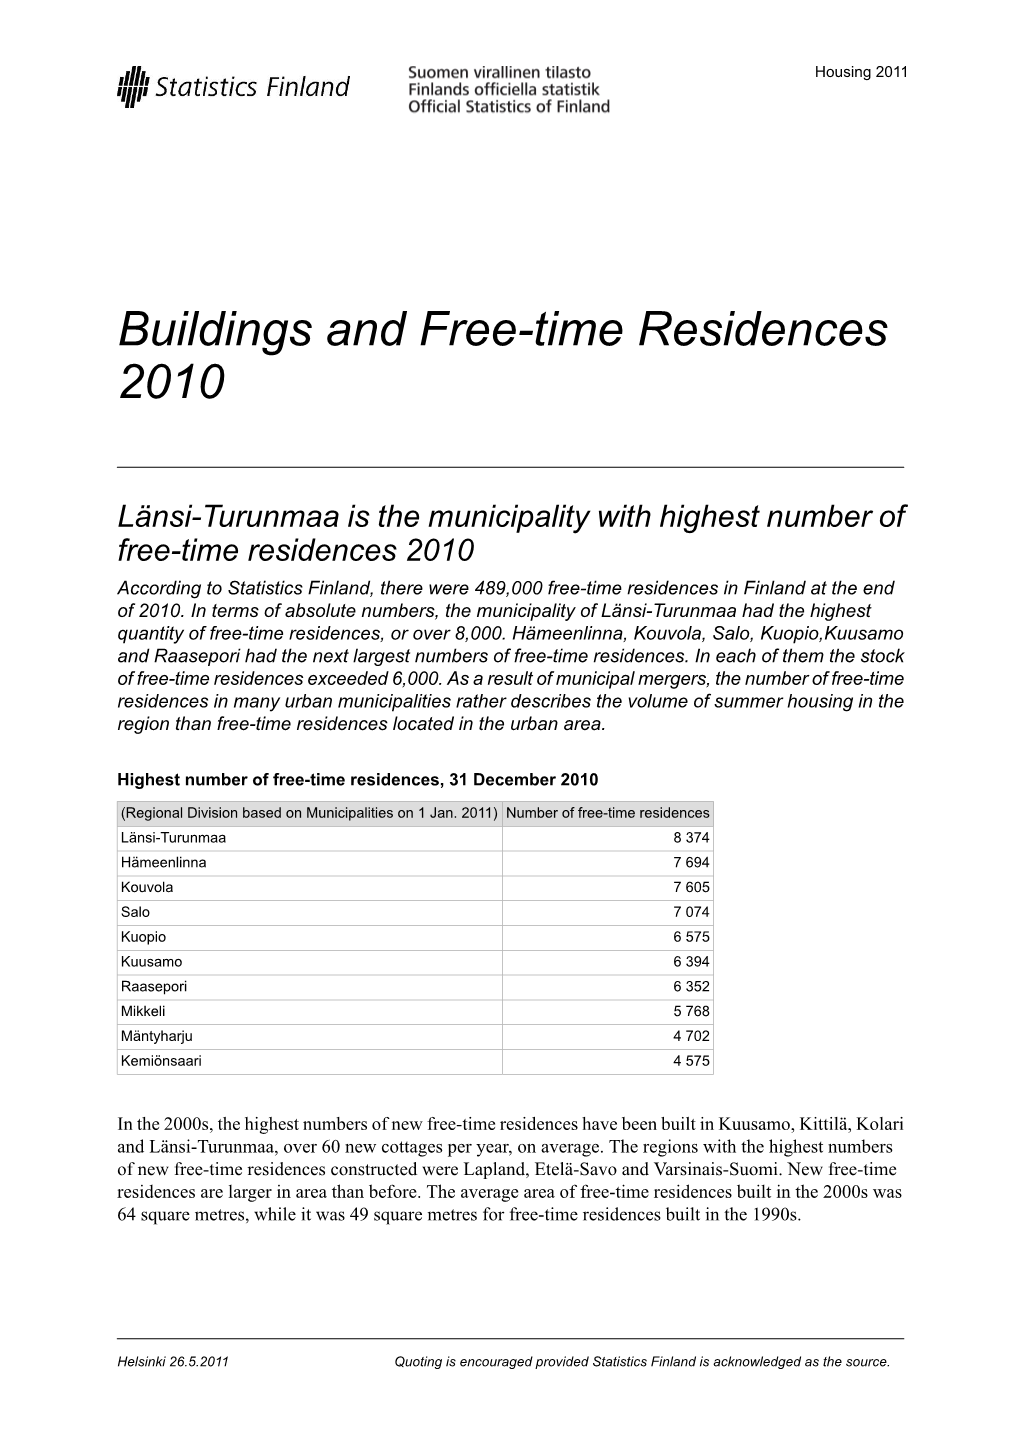 Buildings and Free-Time Residences 2010